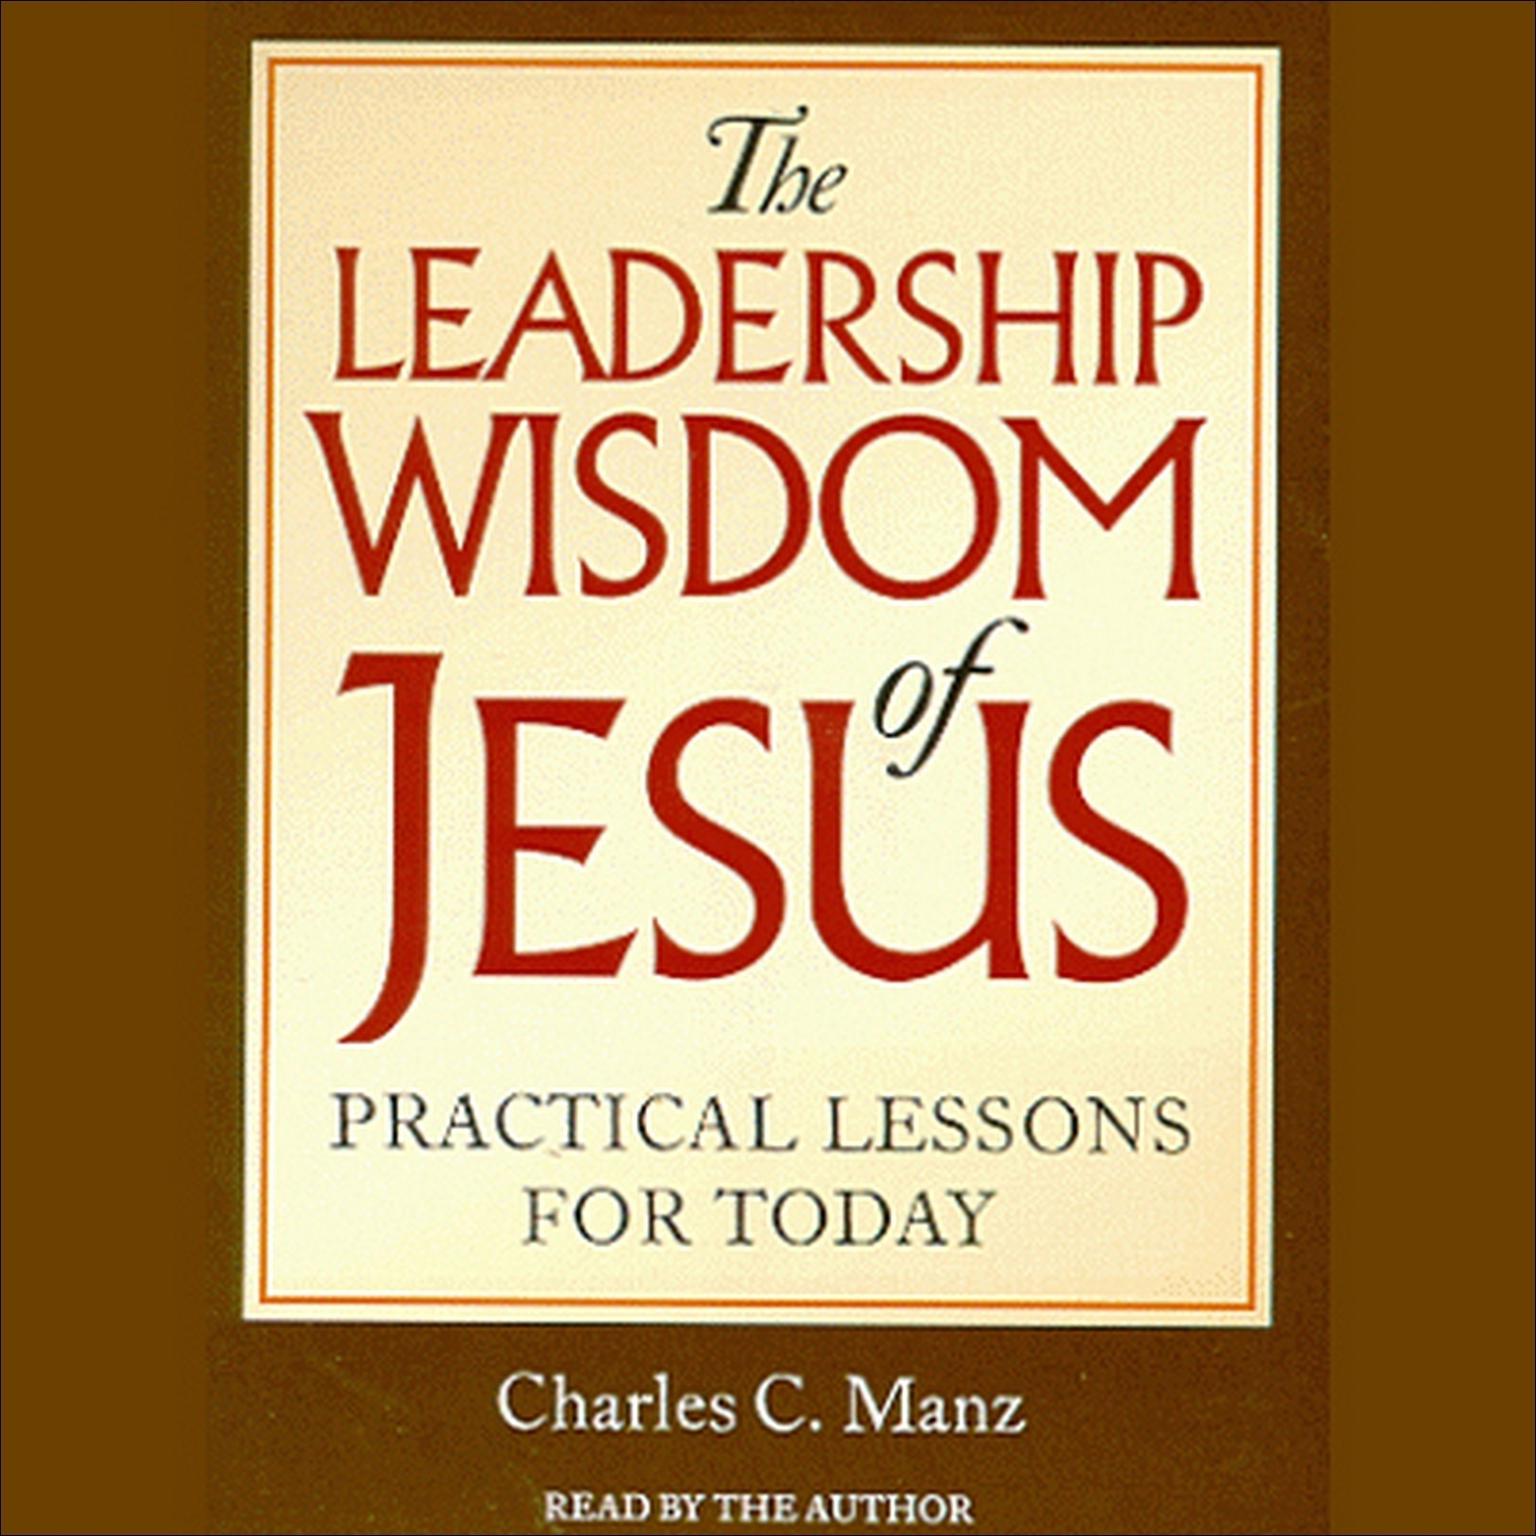 The Leadership Wisdom of Jesus: Practical Lessons for Today Audiobook, by Charles C. Manz